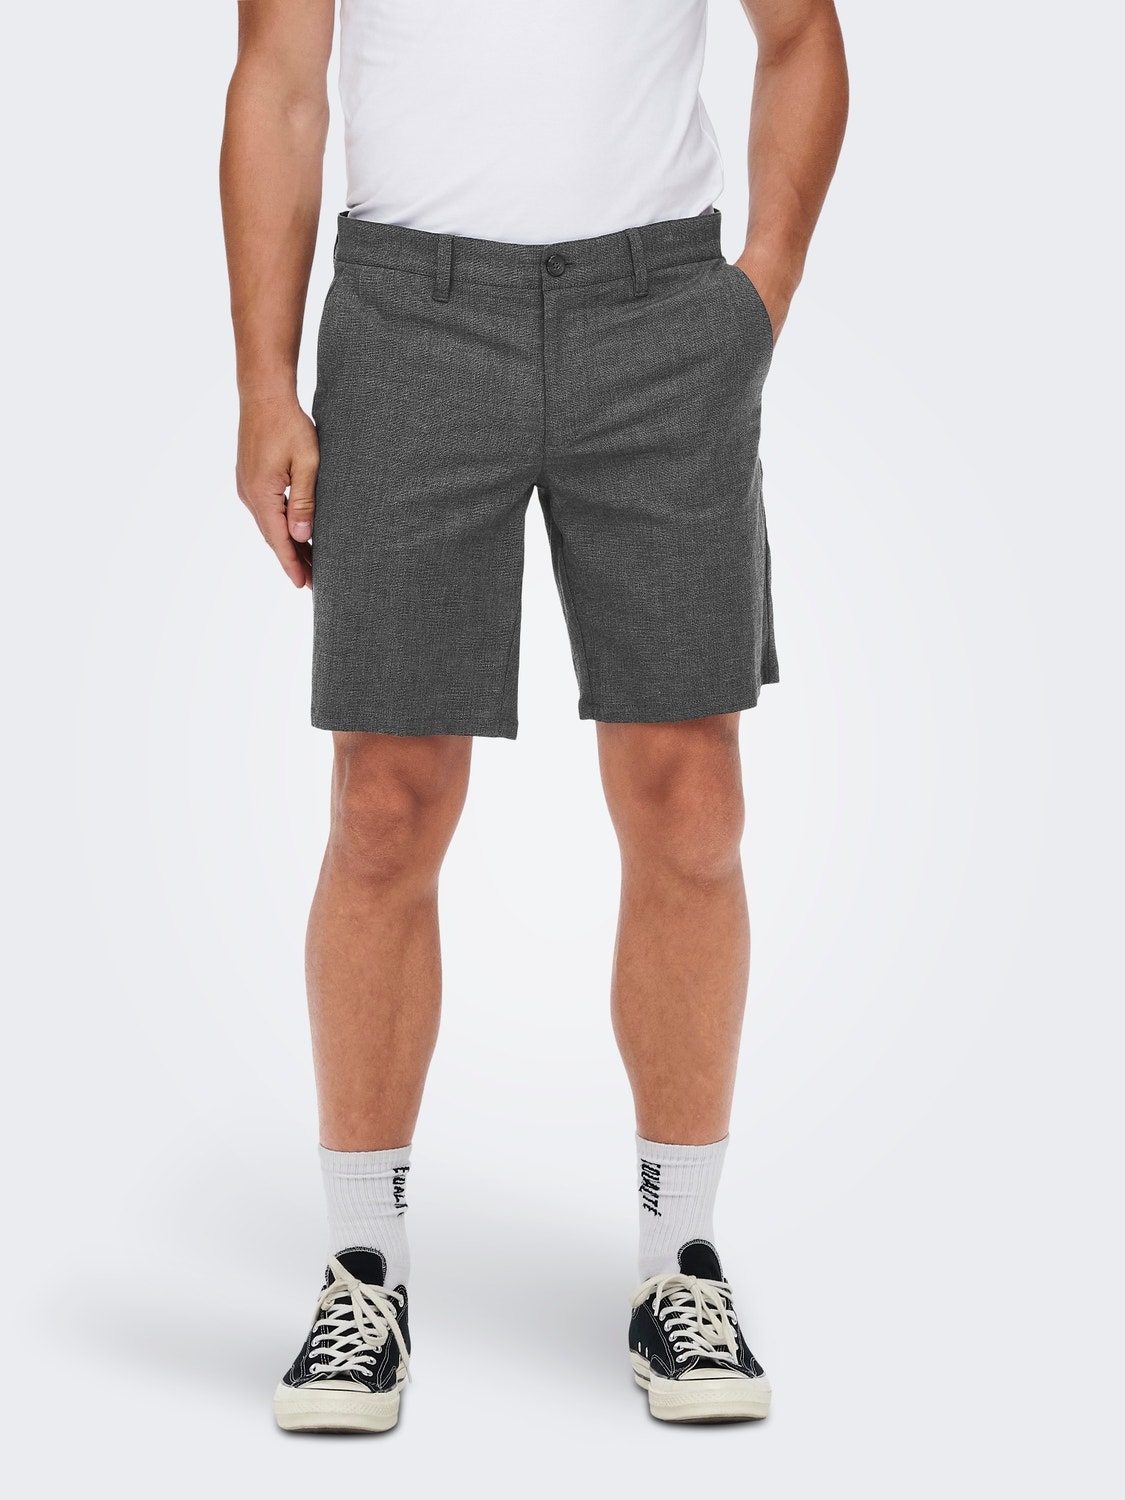 ONLY & SONS Classic chino shorts -Black - 22022339